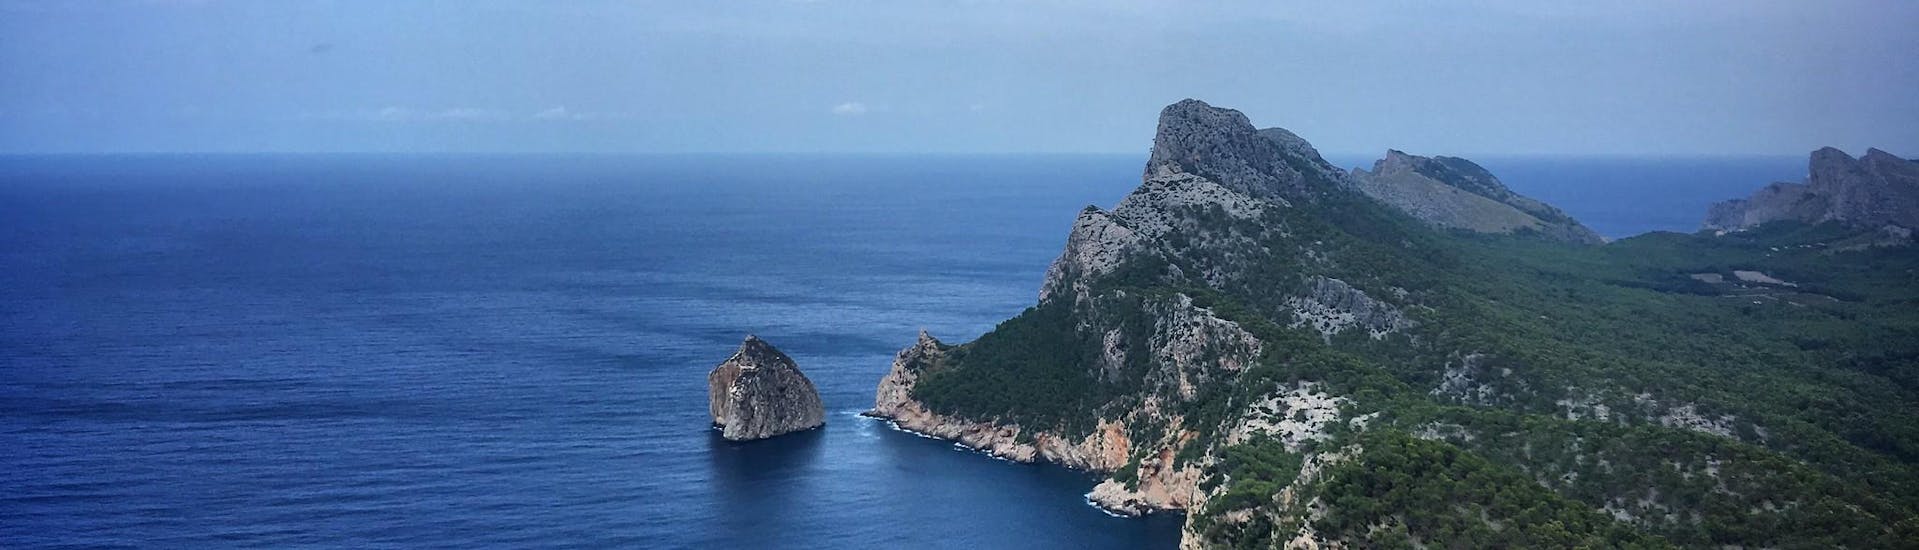 View of Cap Formentor from a boat trip in Mallorca.